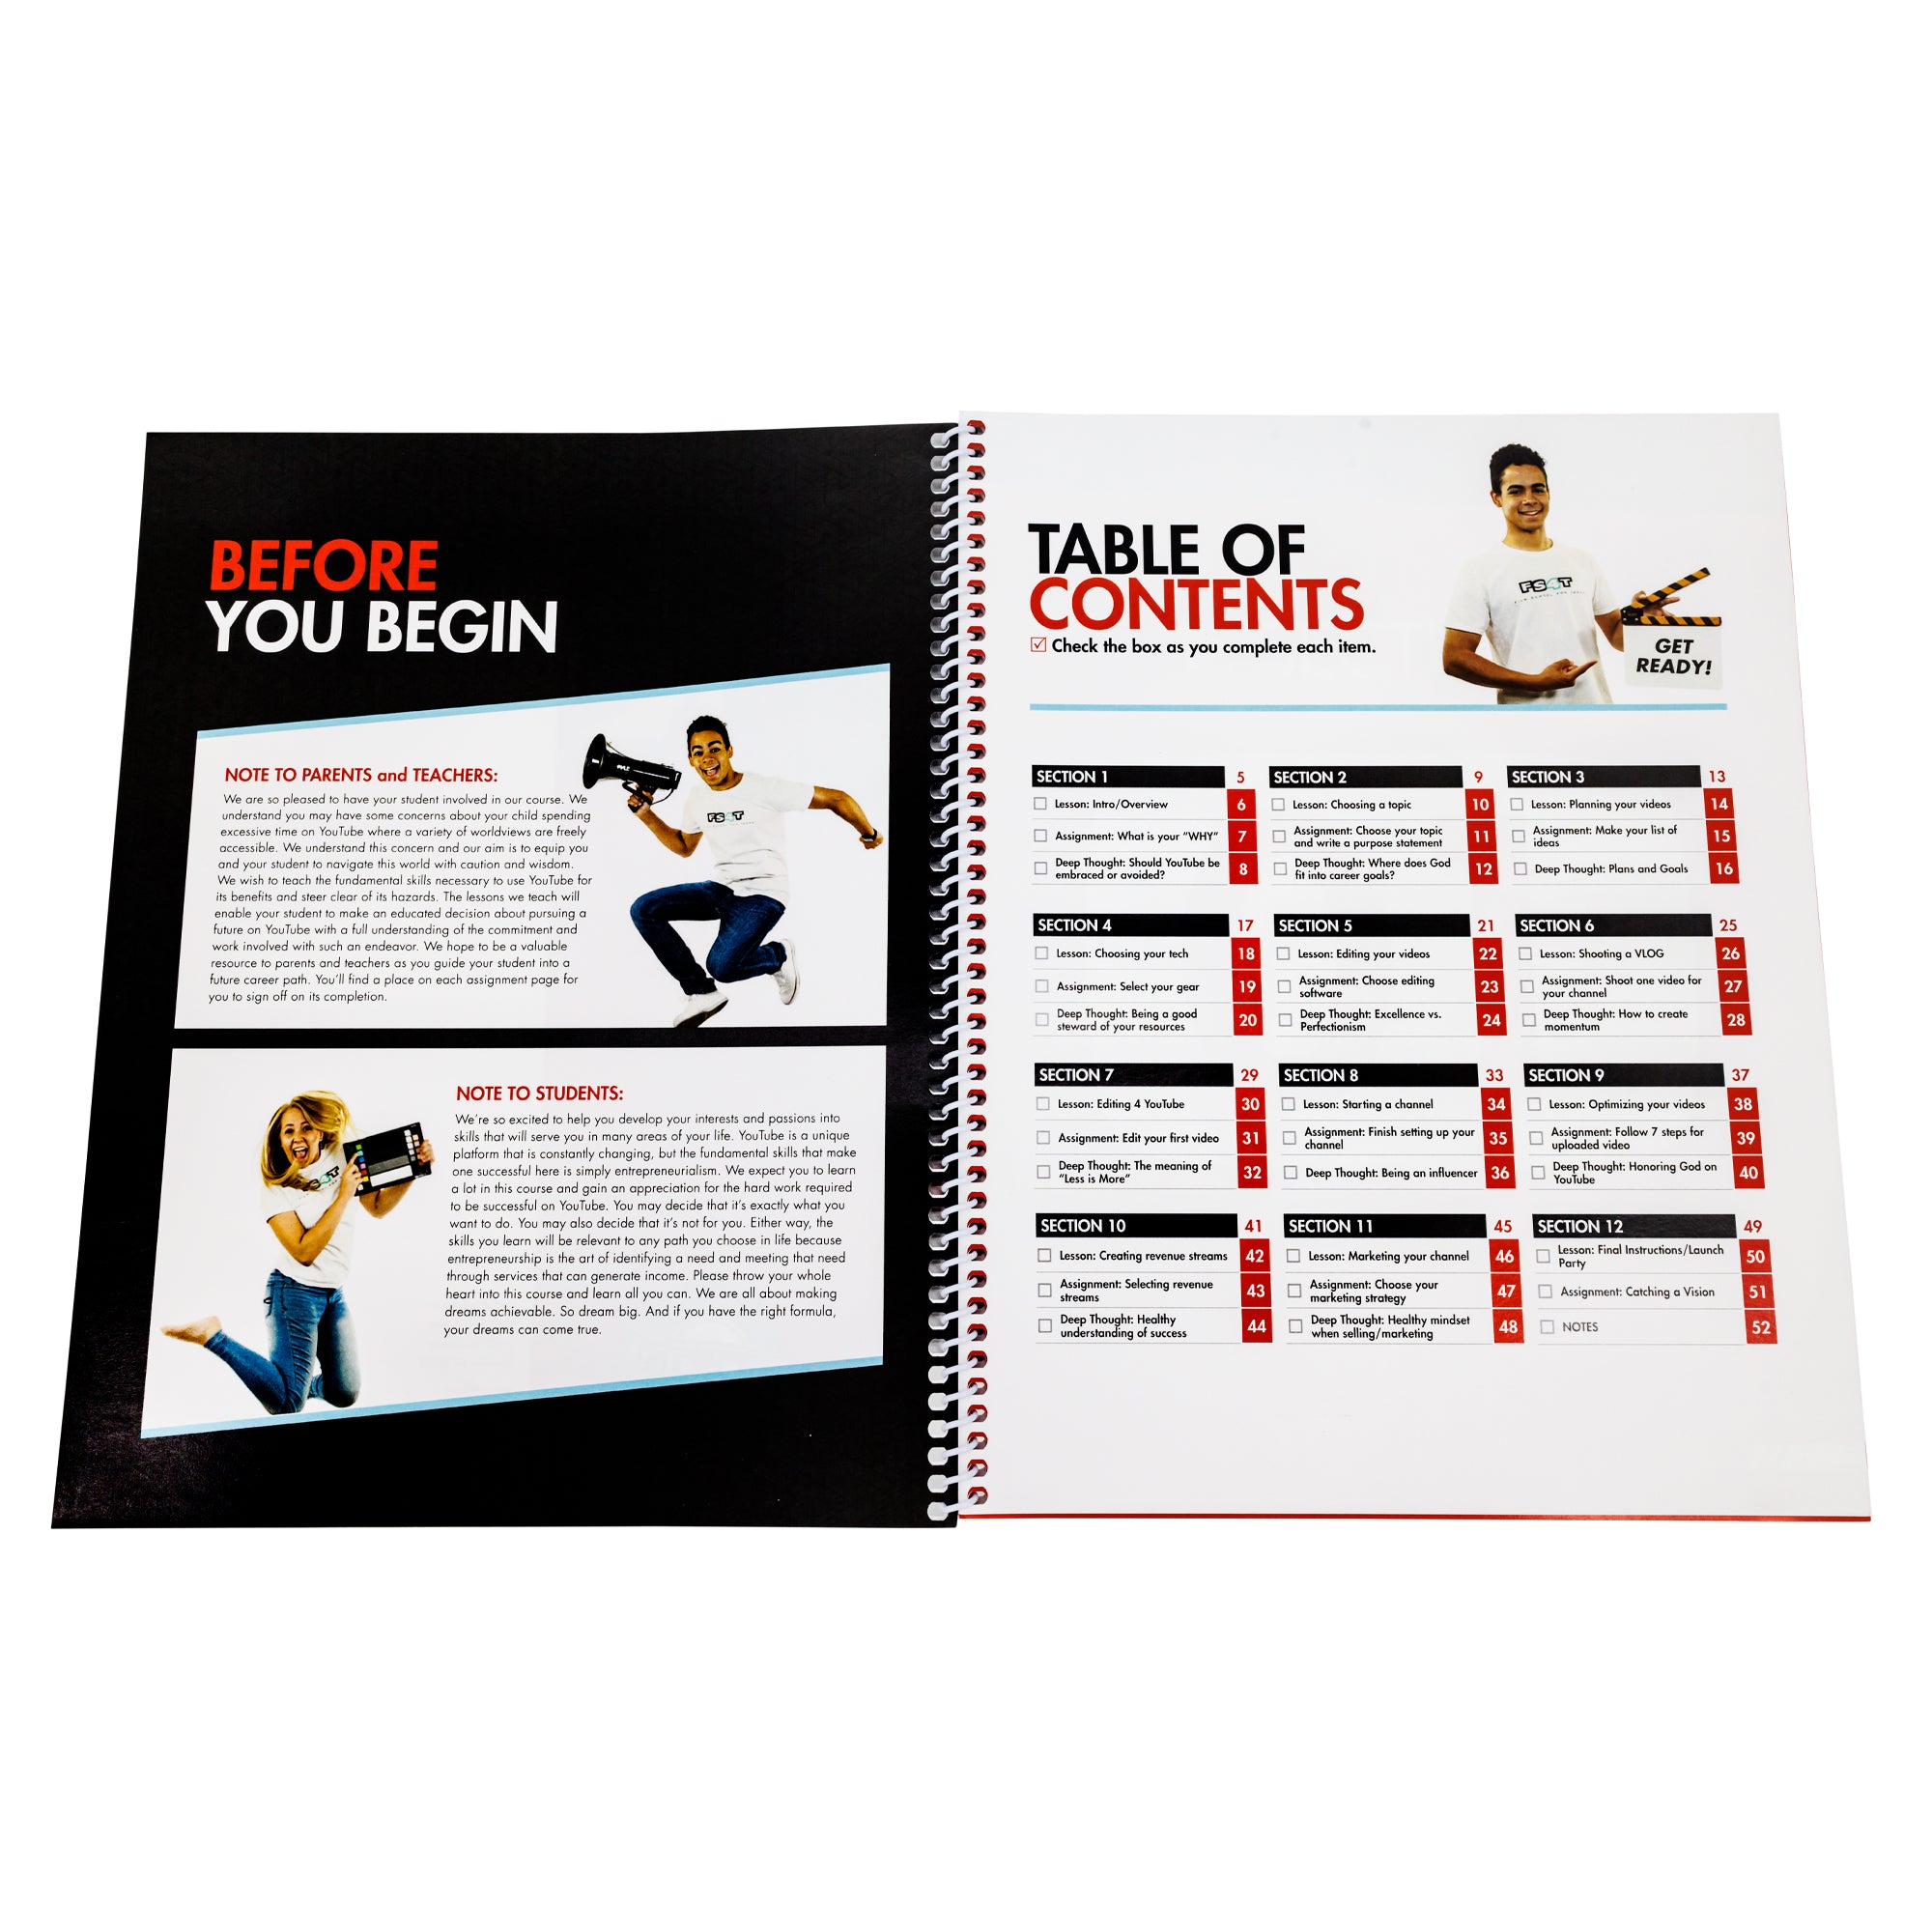 The spiral bound Intro to Filmmaking is open. The left page has a black background with 2 pictures of teenagers and important notes. The teenage boy in the top pic is holding a megaphone and squatting down. The girl in the pic below is holding a color checker board and jumping into the air. The right page shows the contents with 12 sections and checkboxes as you go. In the top-right is a teenage boy with a clapperboard that reads "get ready."